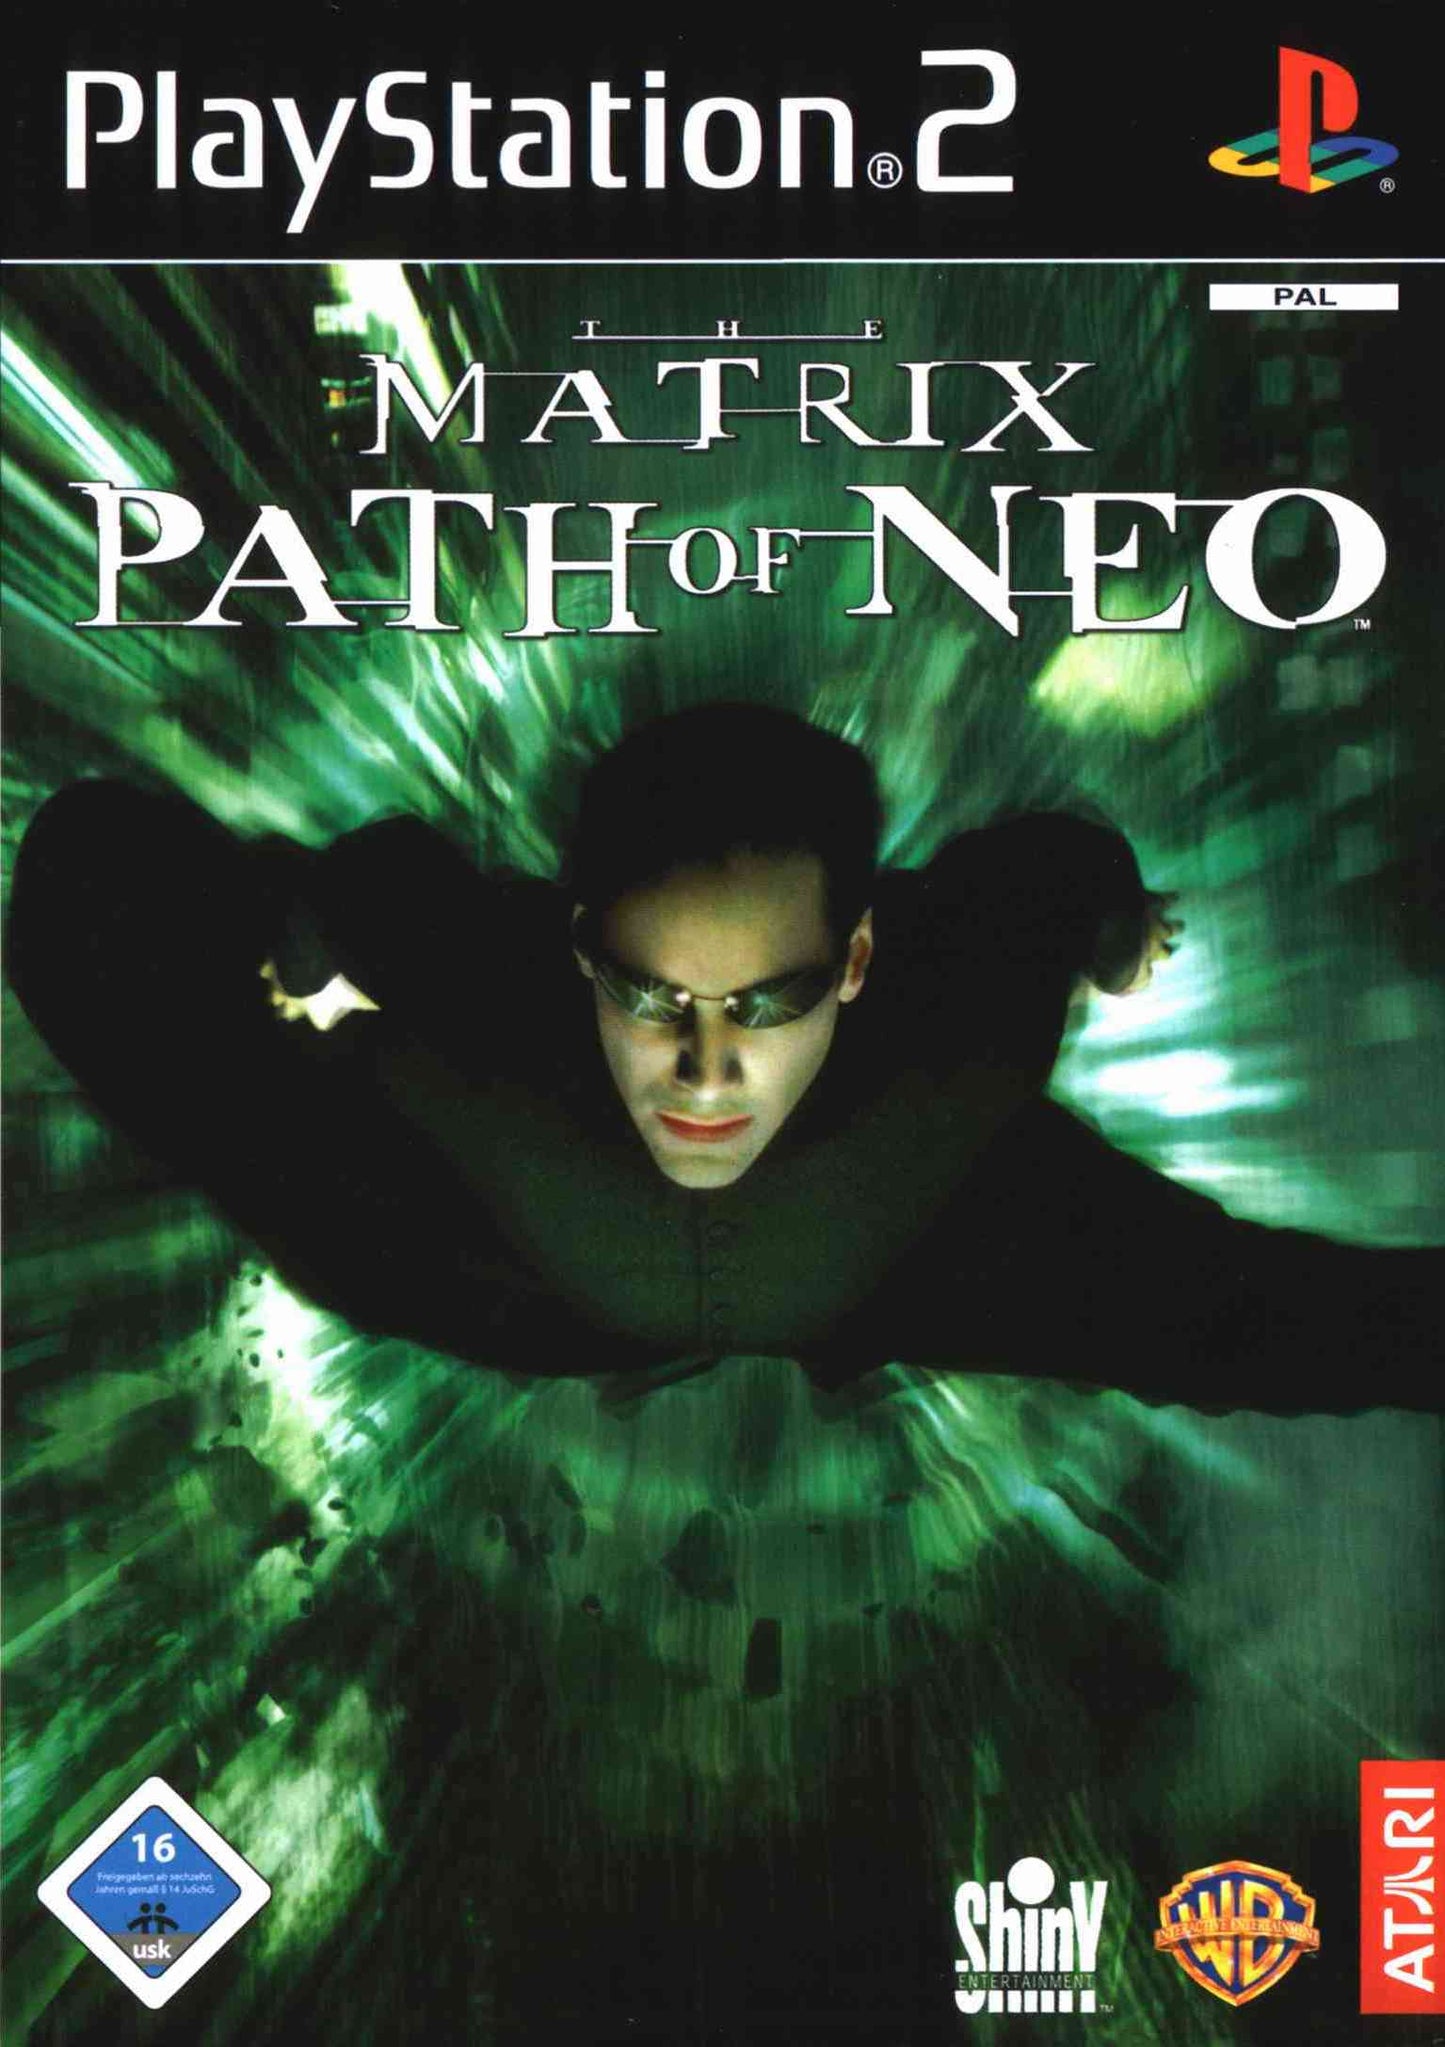 The Matrix: Path of Neo - PlayStation 2 (USED)